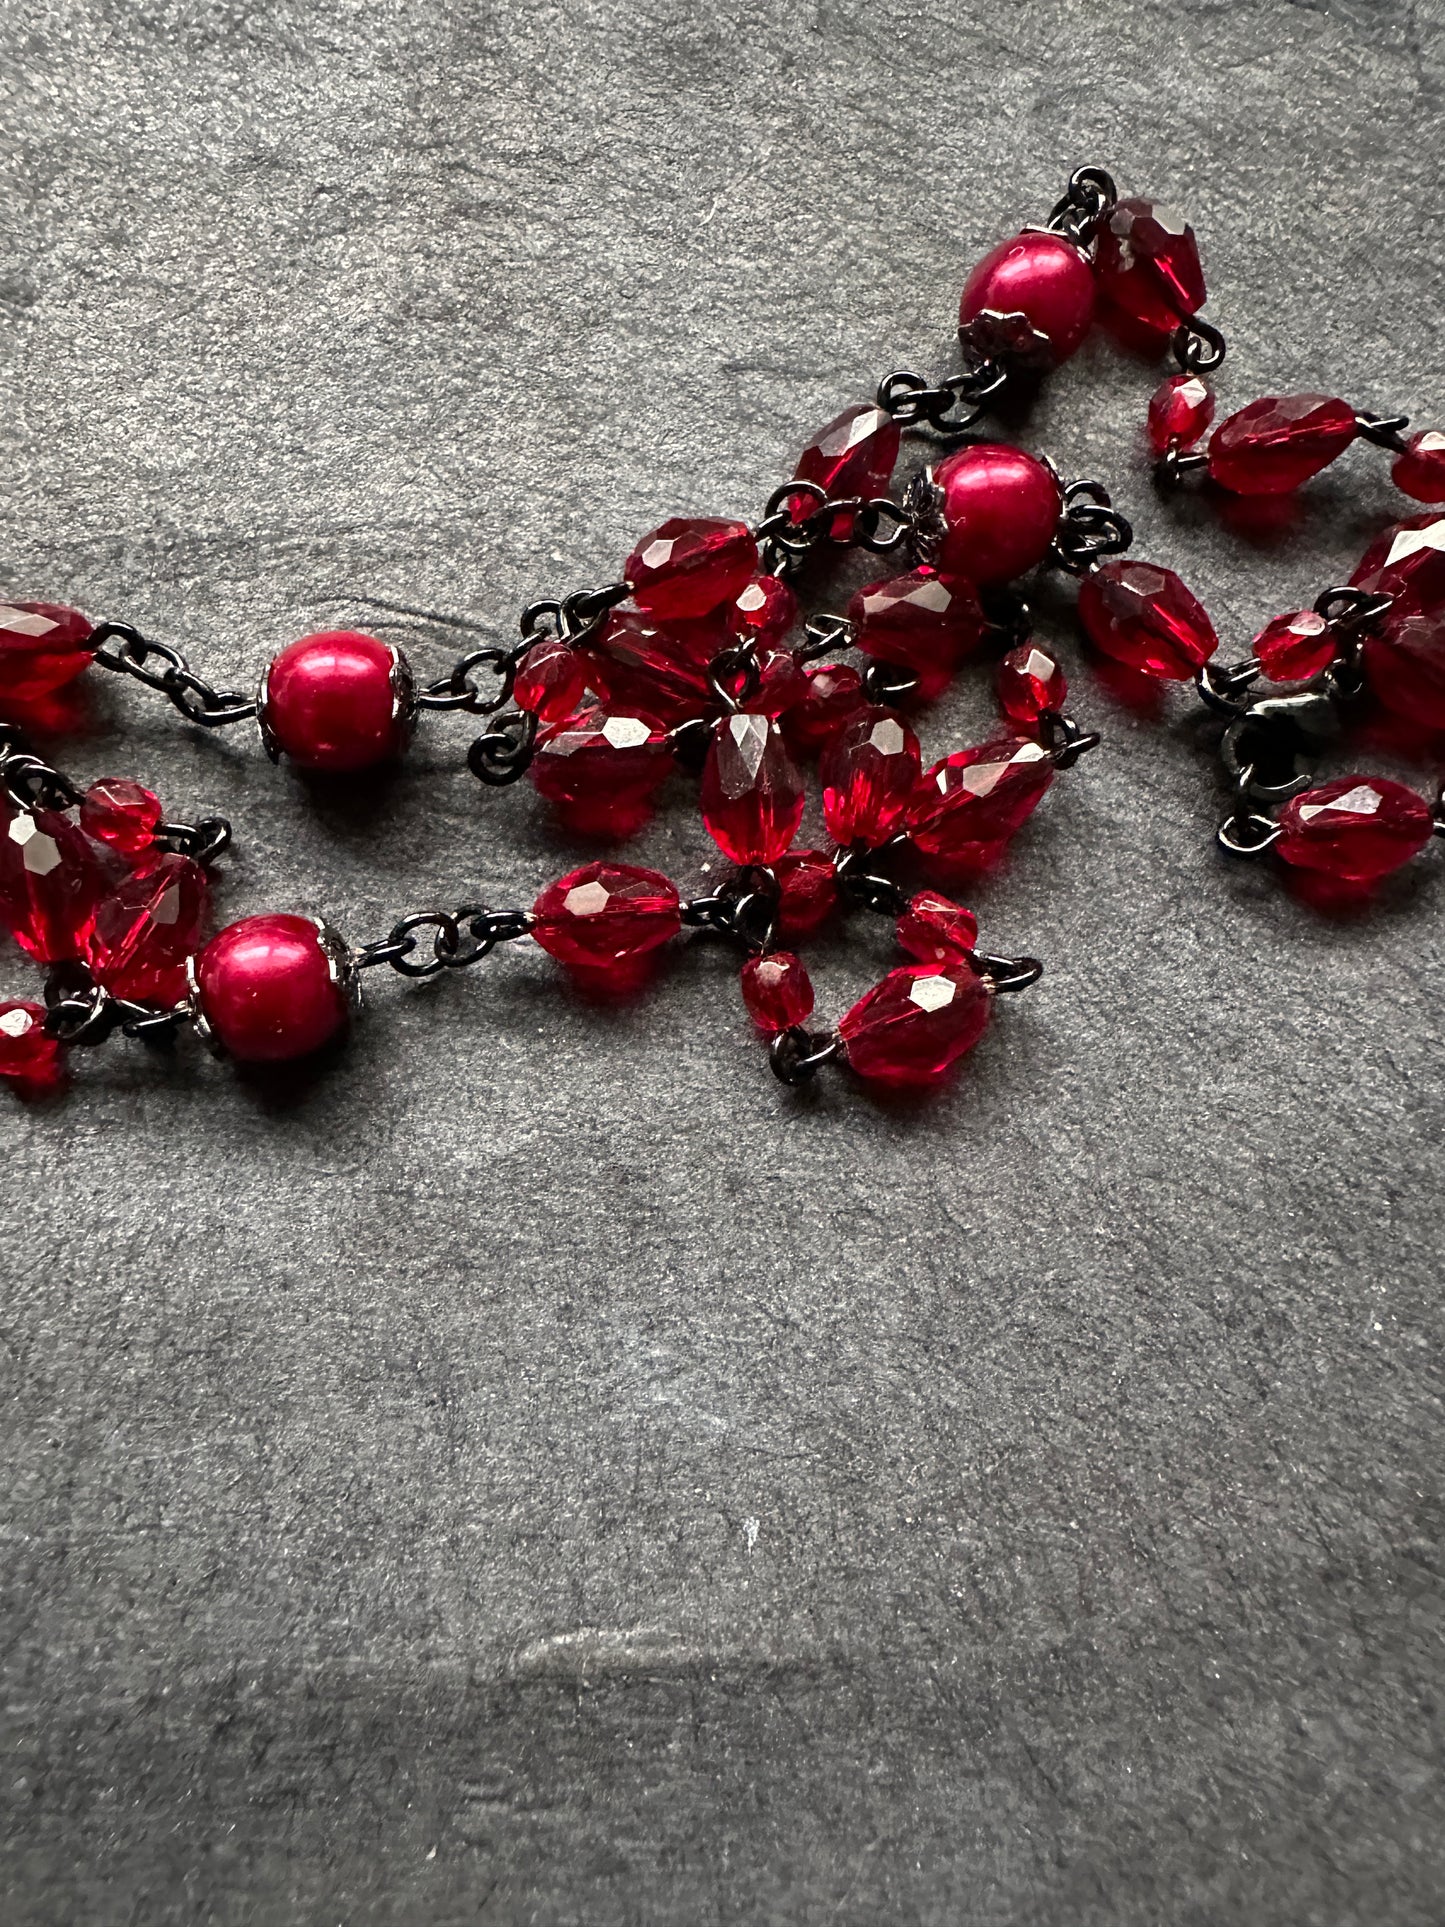 Dark Persephone necklace with red glass beads